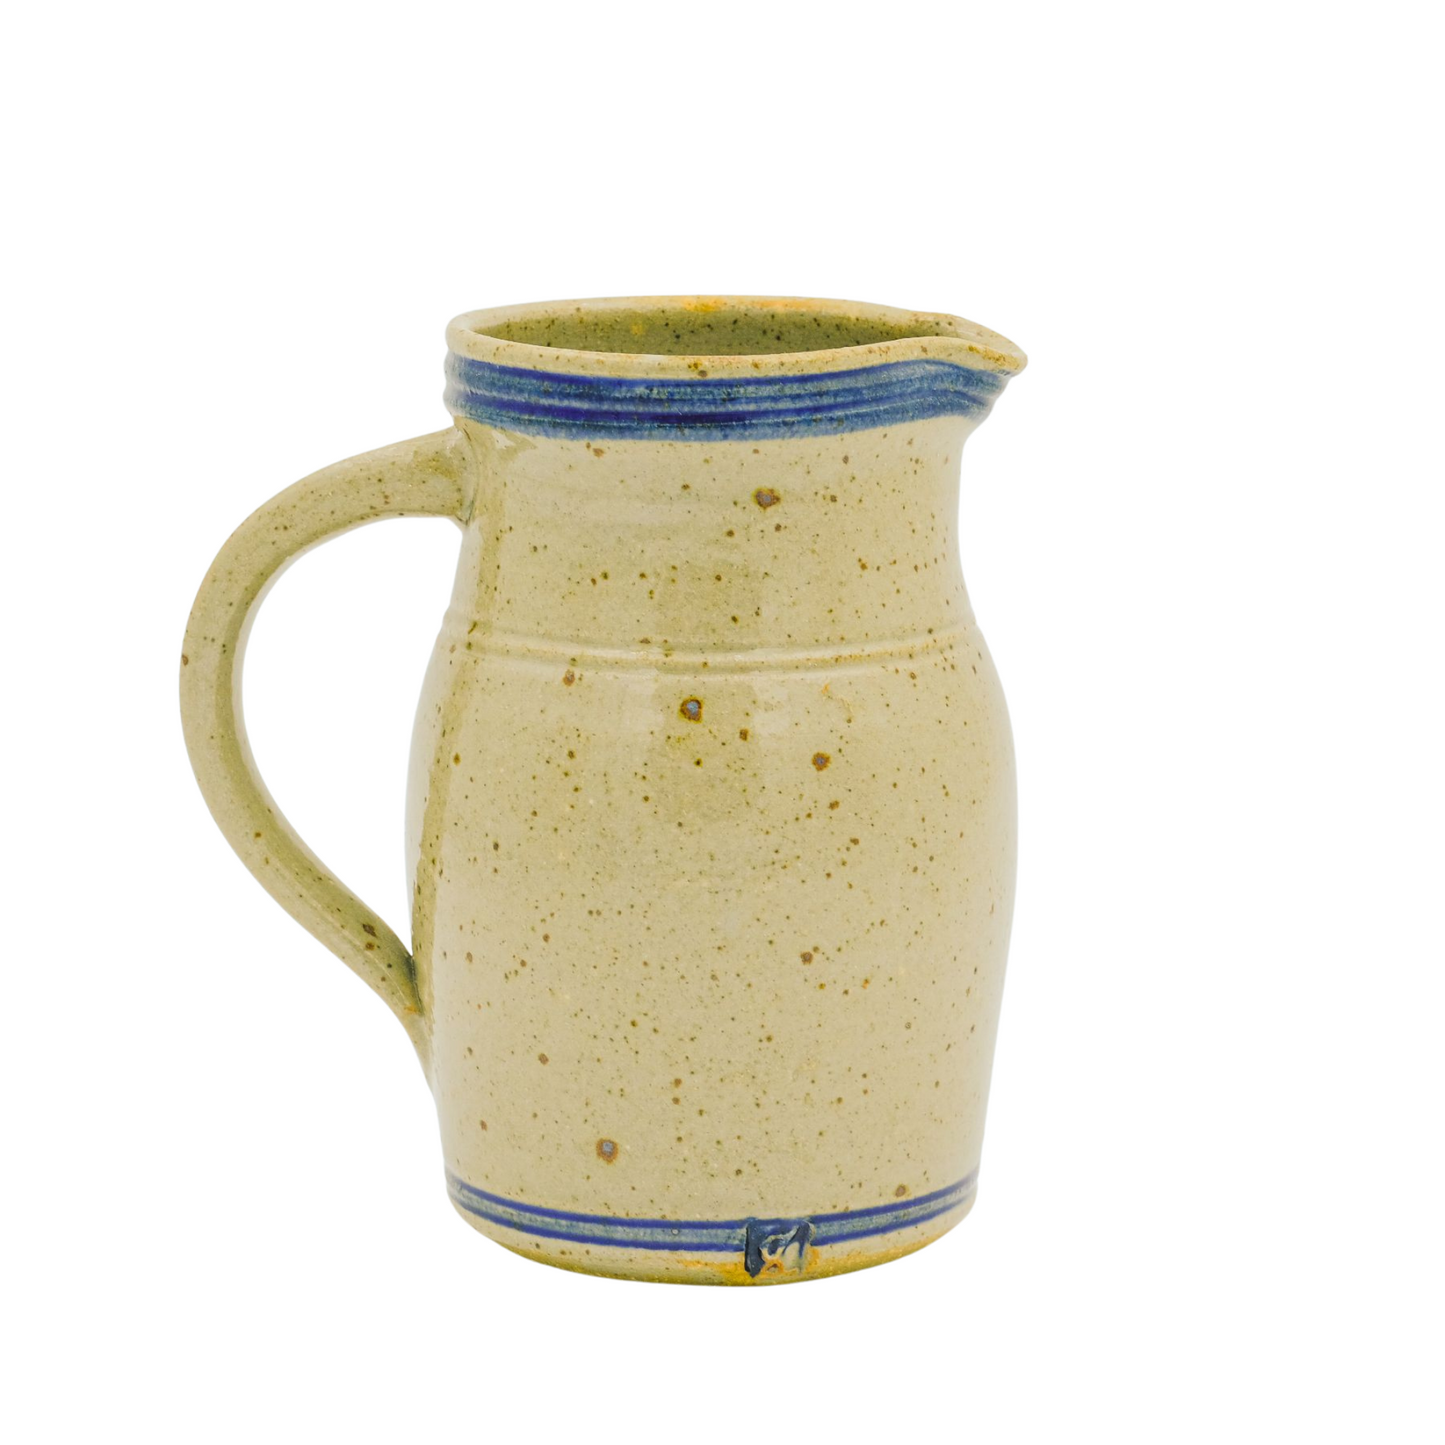 Westerwald Stoneware Pitcher - Commemorating Canaan Connecticut